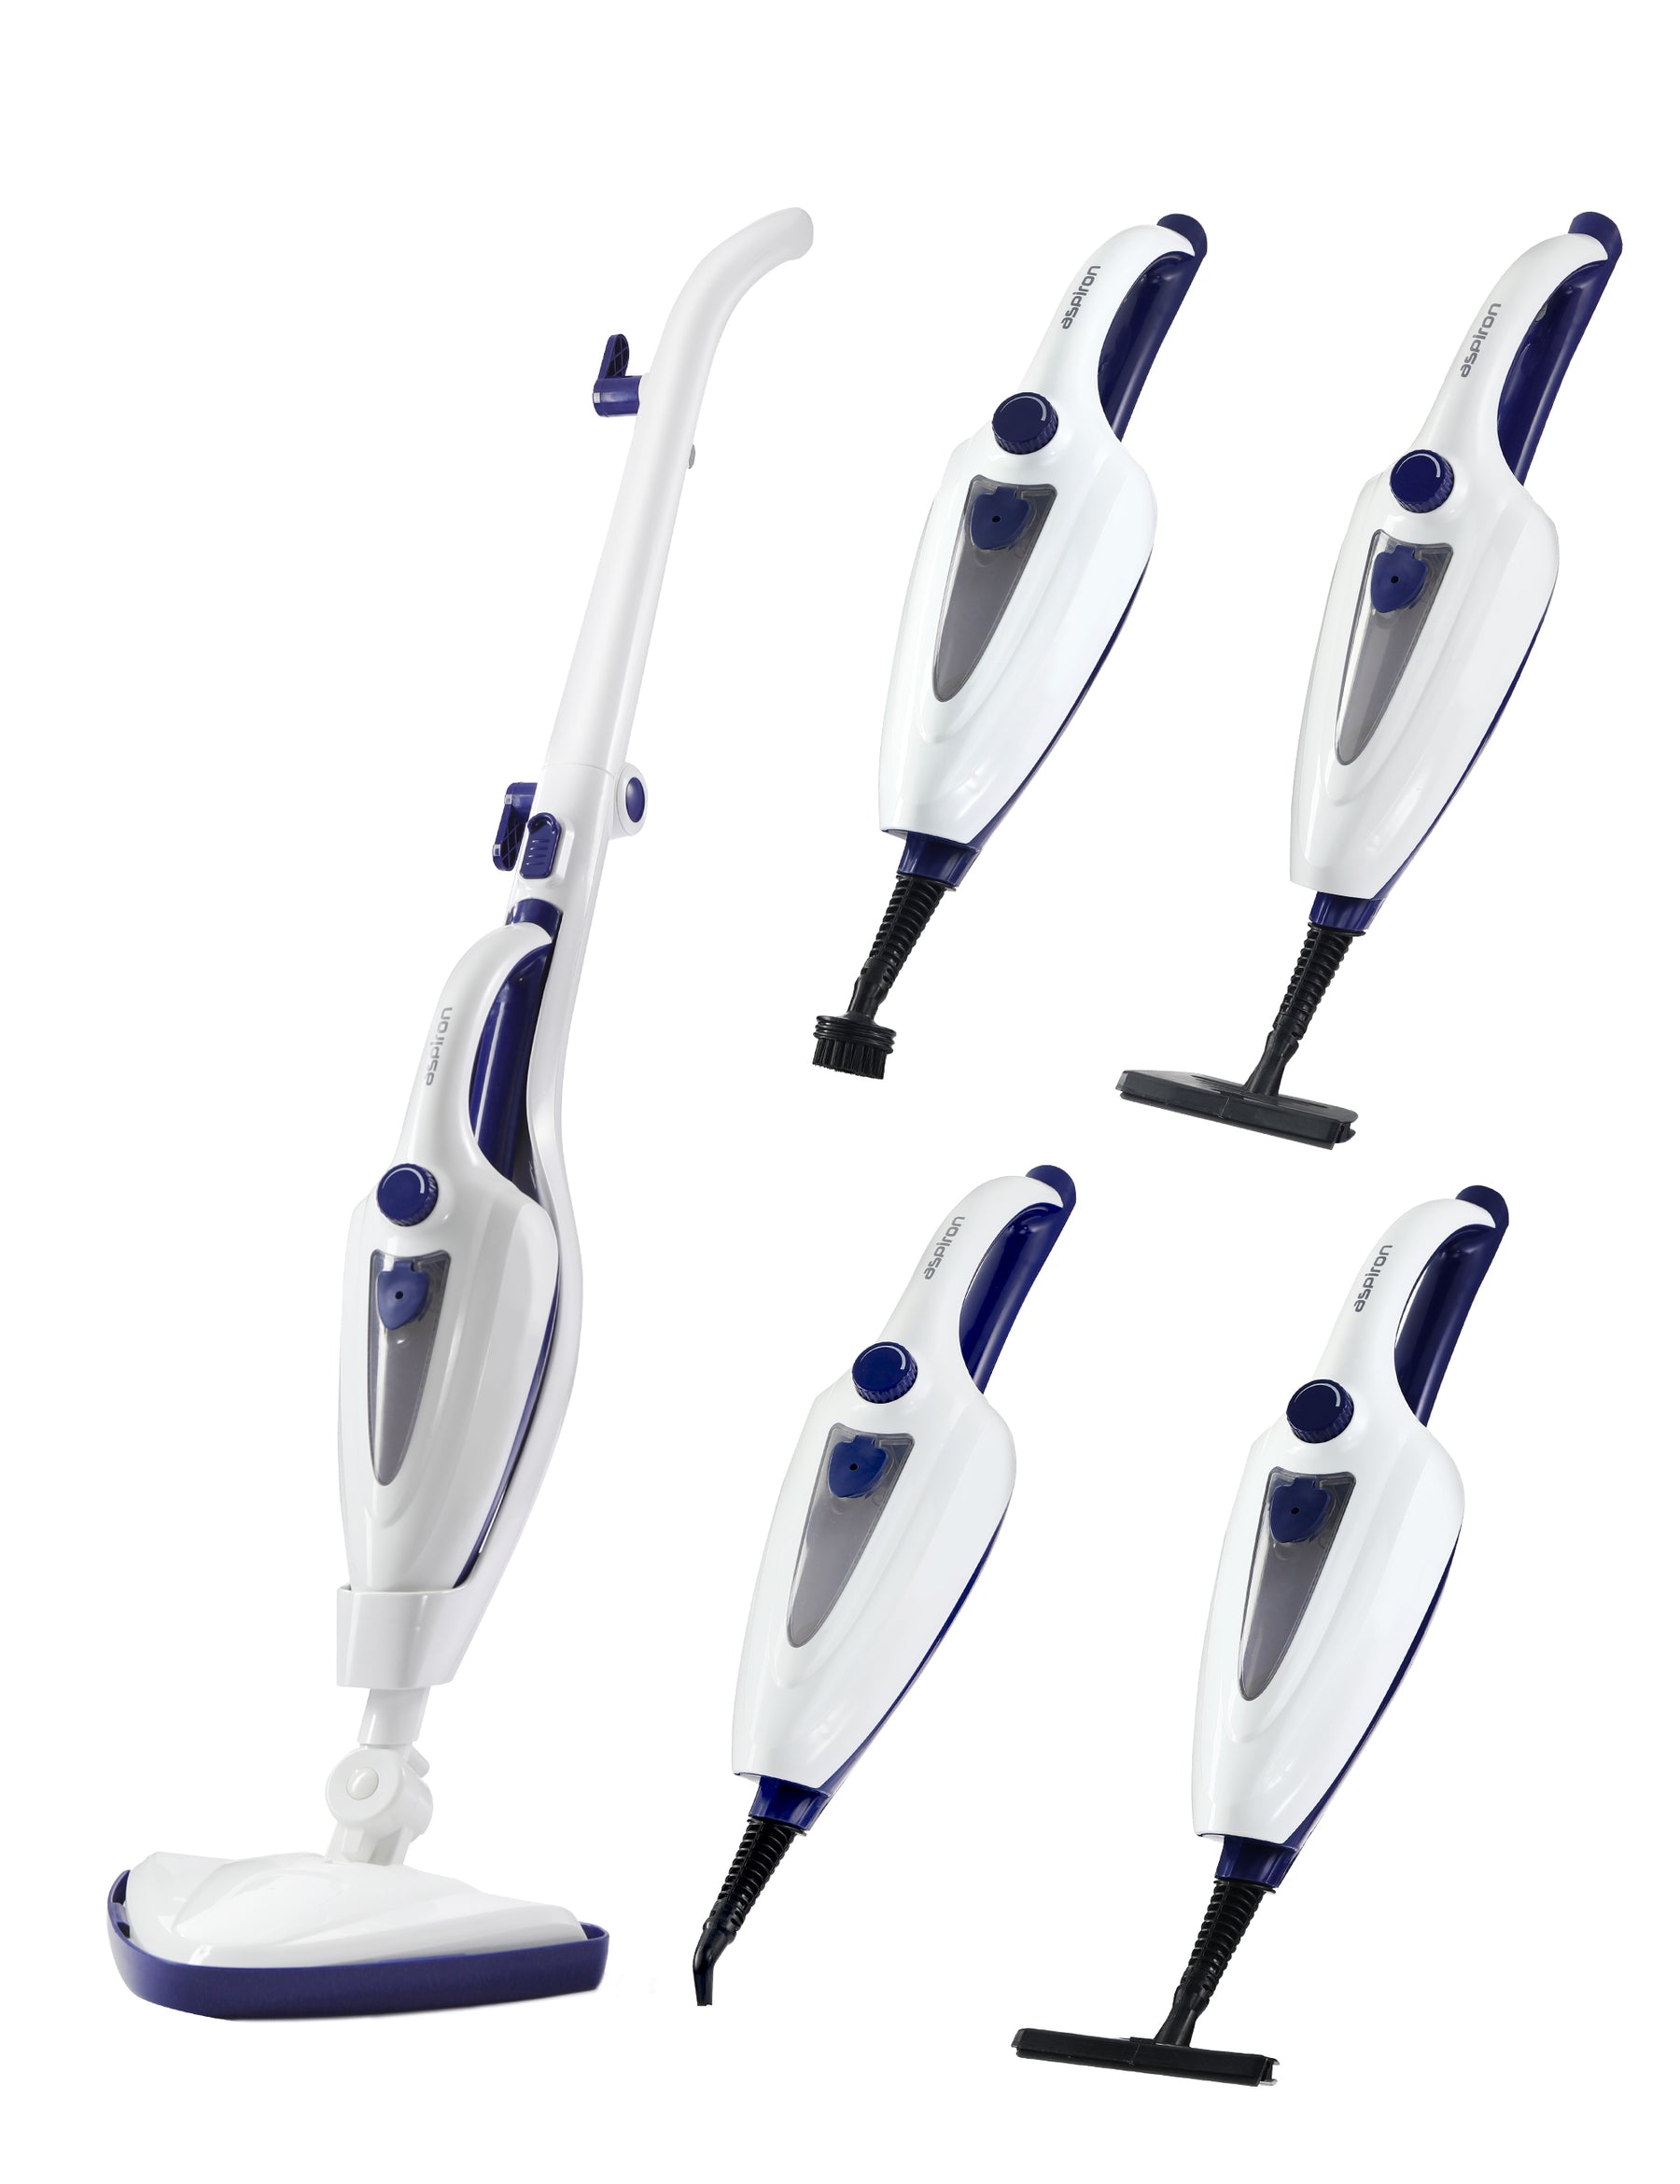 ASPIRON® Professional Steam Mop CA039, 15-Second Fast Heating, Large 385ml Water Tank